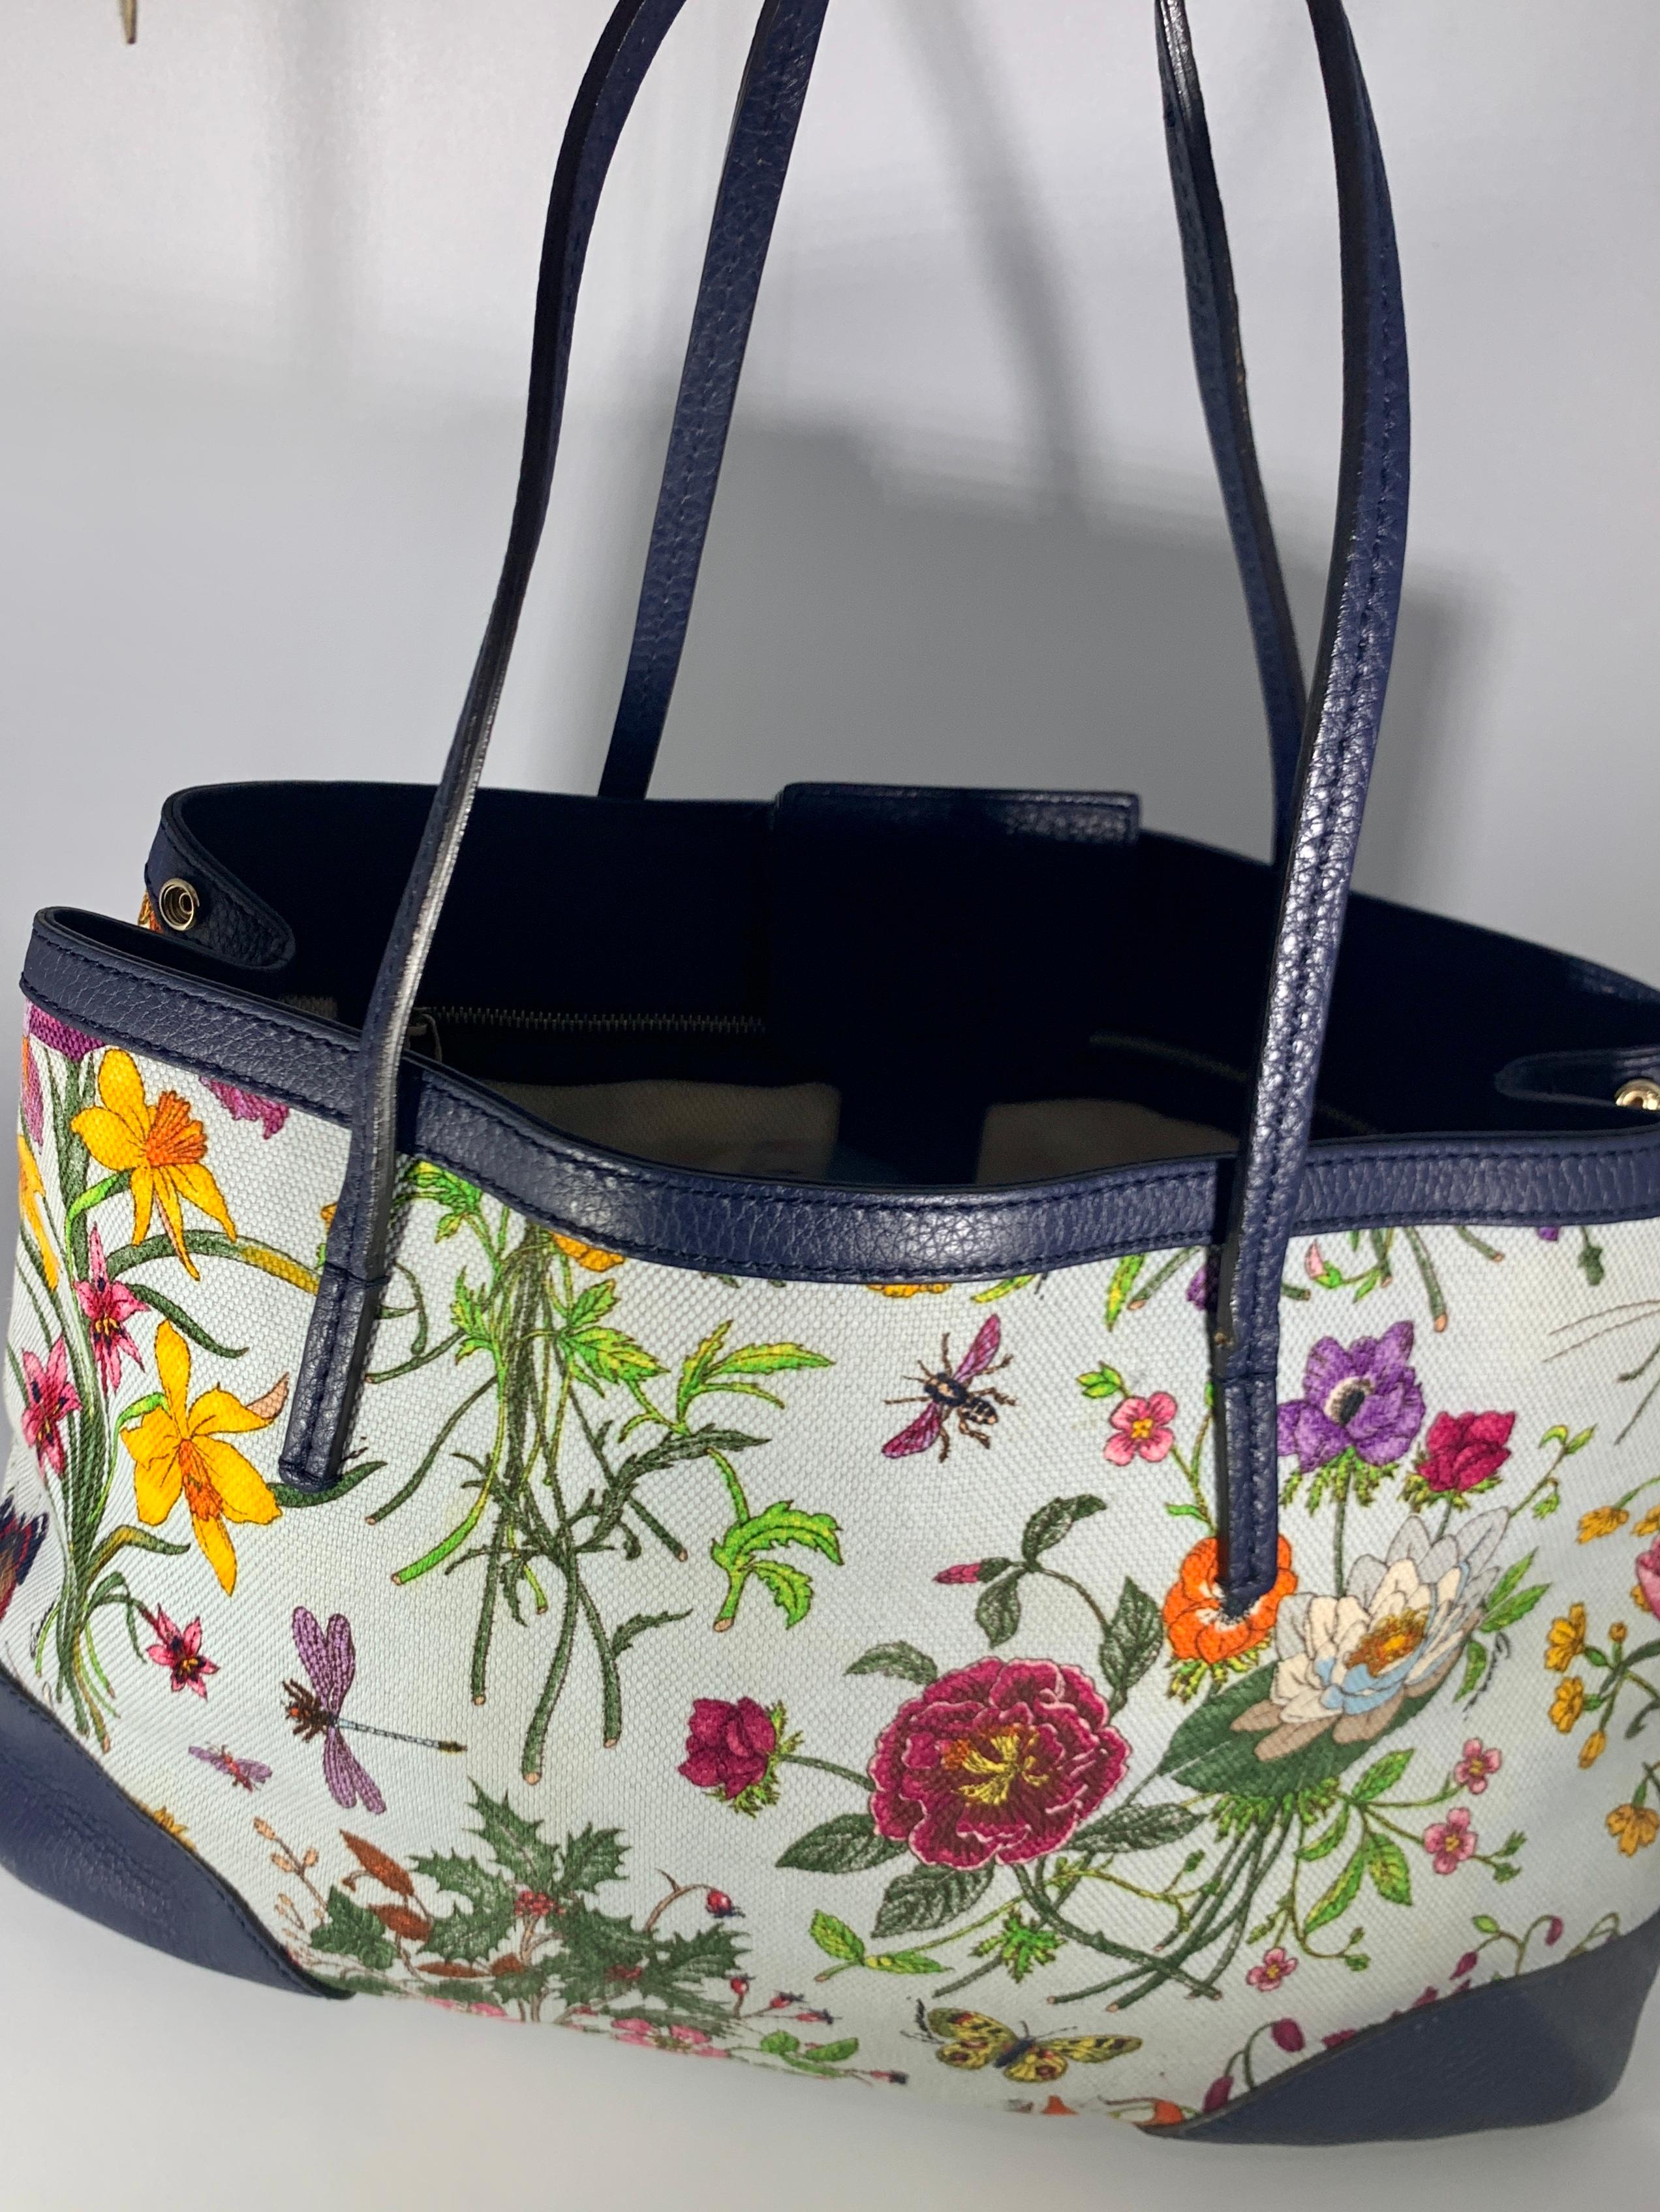 Women's  Gucci Flora Canvas Leather Trim Navy Blue With Flowers  Tote Handbag 1705189